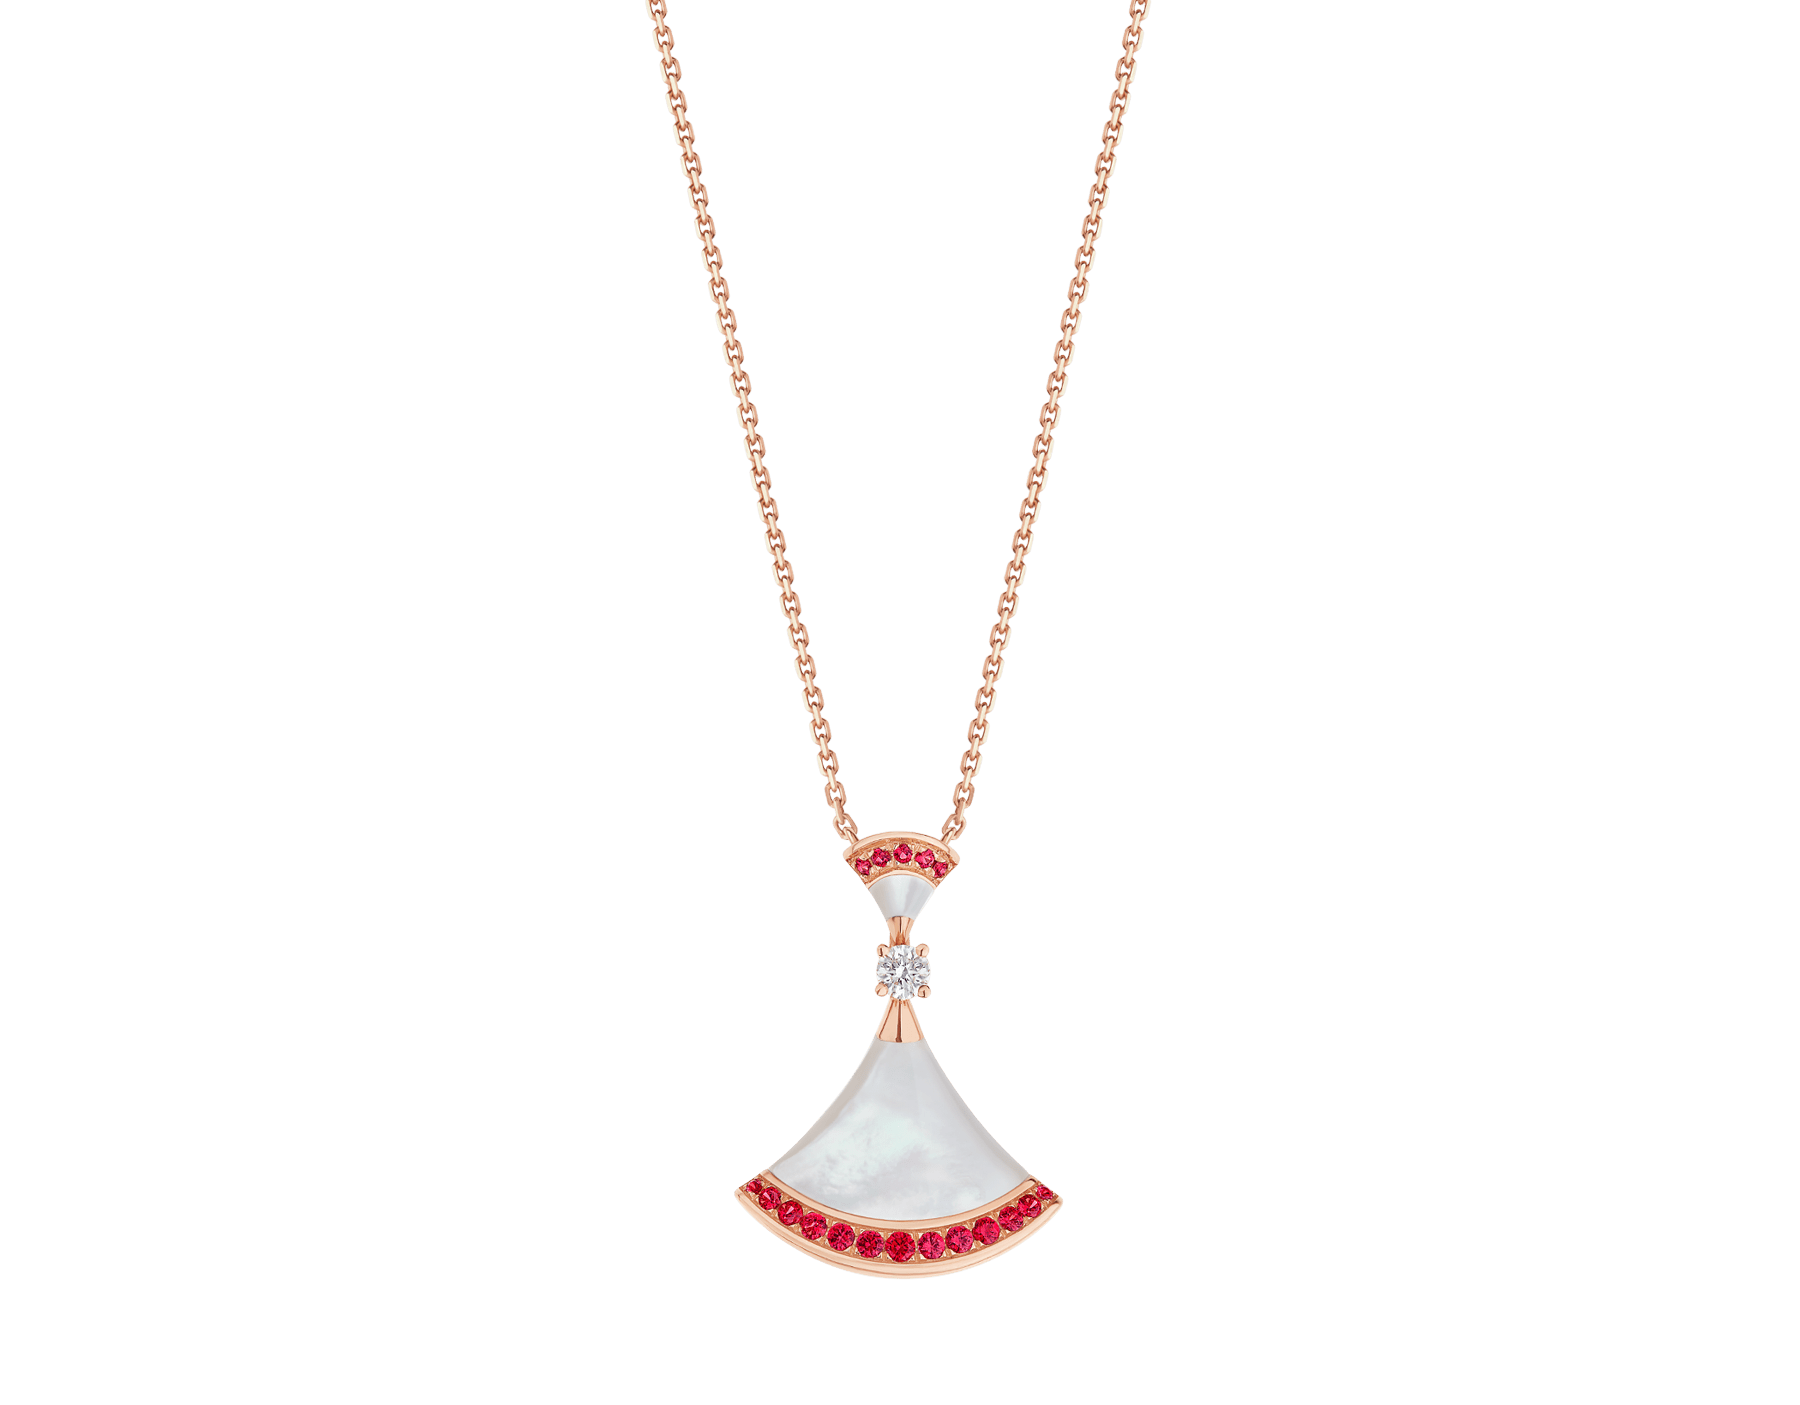 DIVAS' DREAM 18 kt rose gold necklace set with mother of pearl elements, a round brilliant-cut diamond and pavé rubies. 358122 image 1